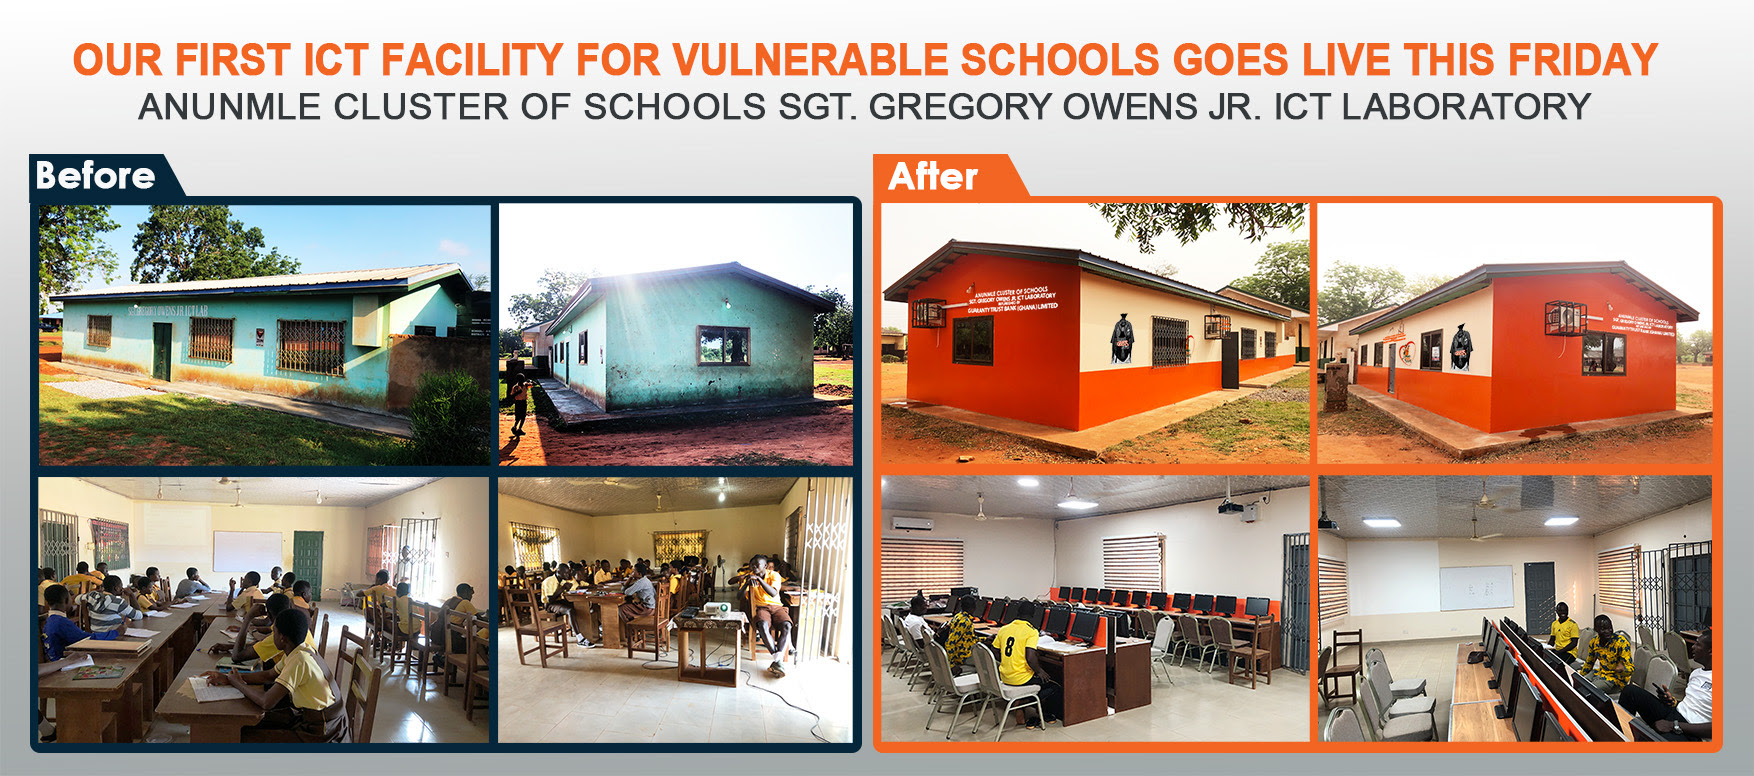 GTBank Commissions ICT Facility For Anunmle Cluster Of Schools